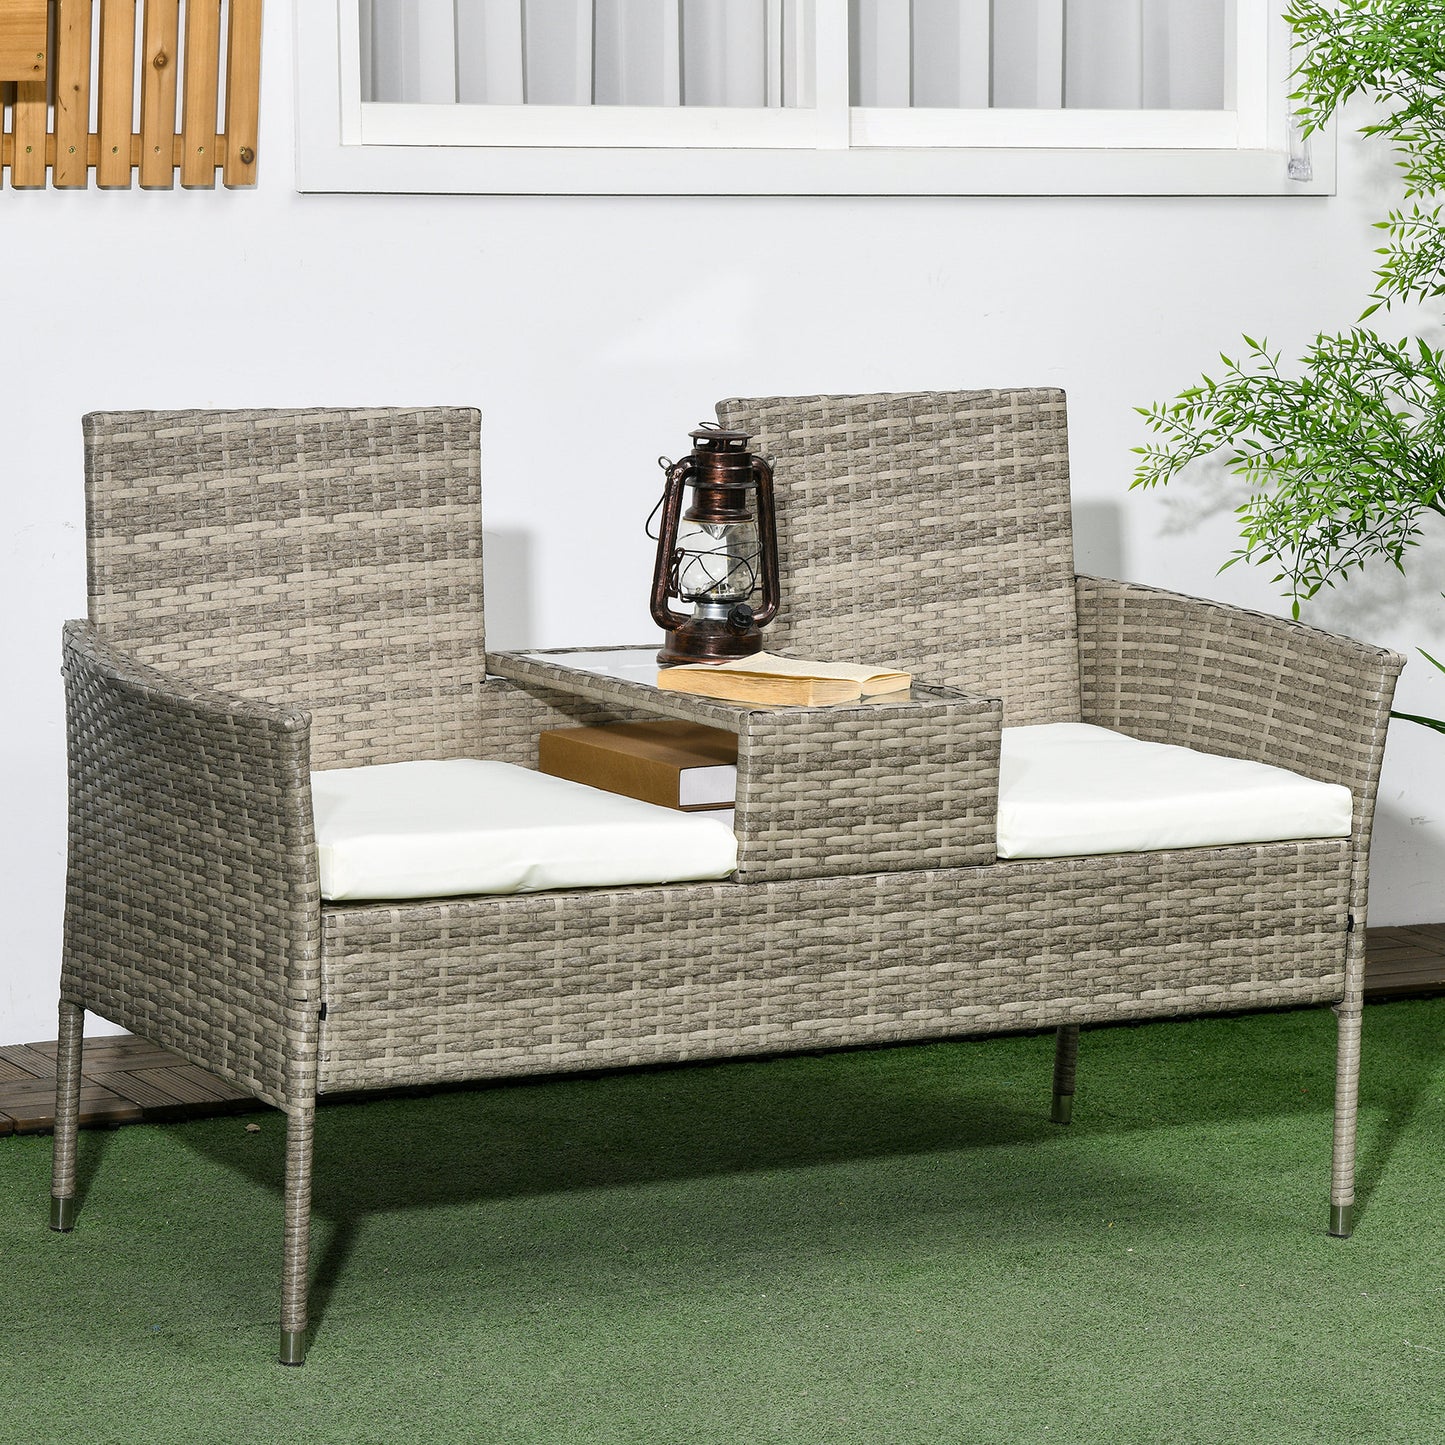 Outsunny Garden Loveseat 2 Seater Rattan Chair for Garden Outddor, with Glass-top Middle Table, Padded Cushions, Grey | Aosom UK